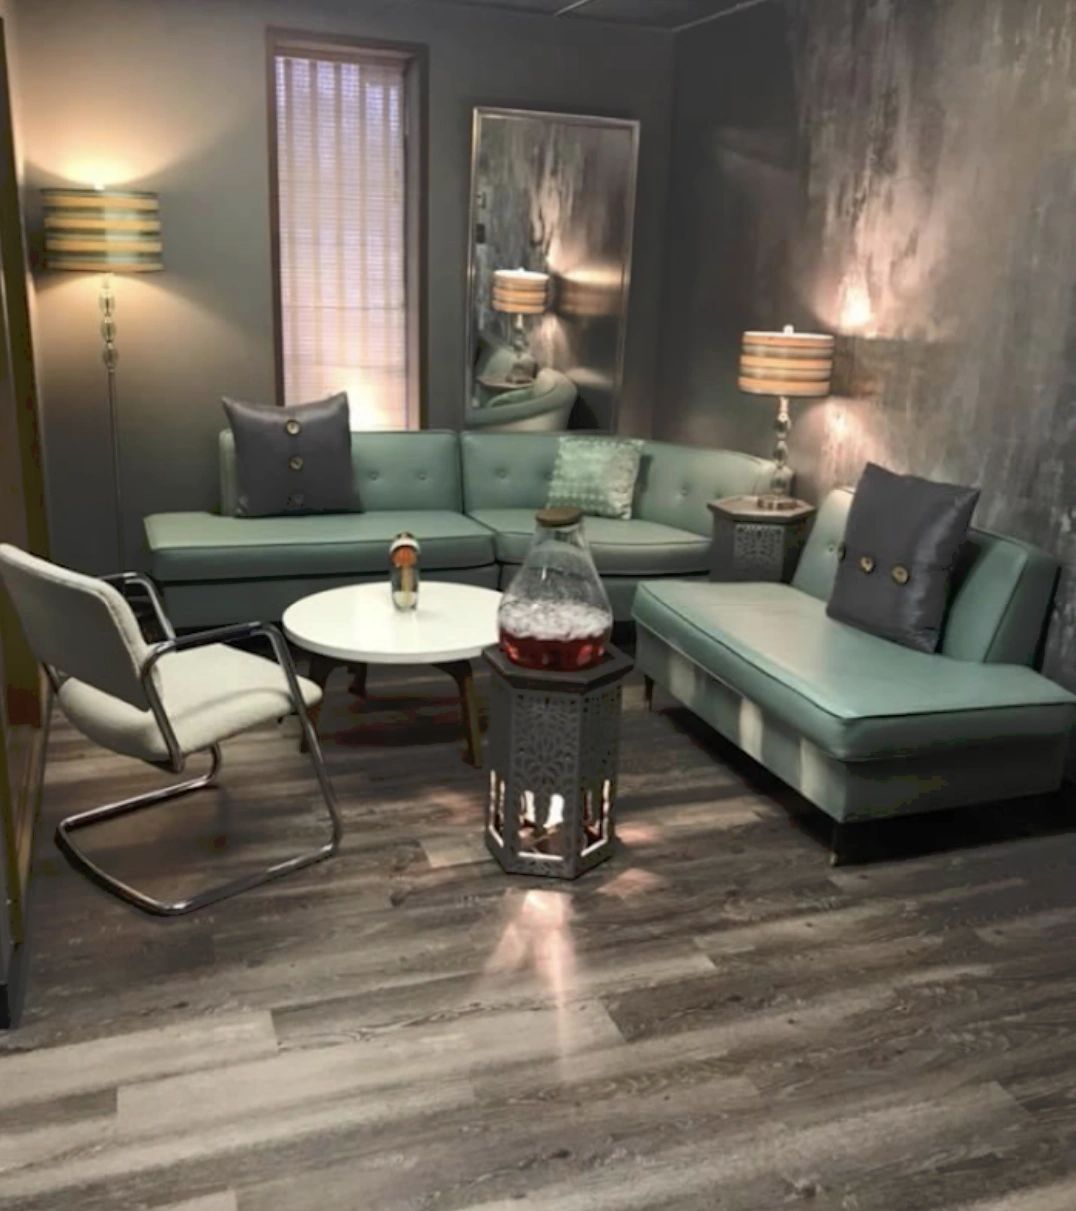 Modern reception room with teal couches and chrome furniture on planks of gray wood flooring